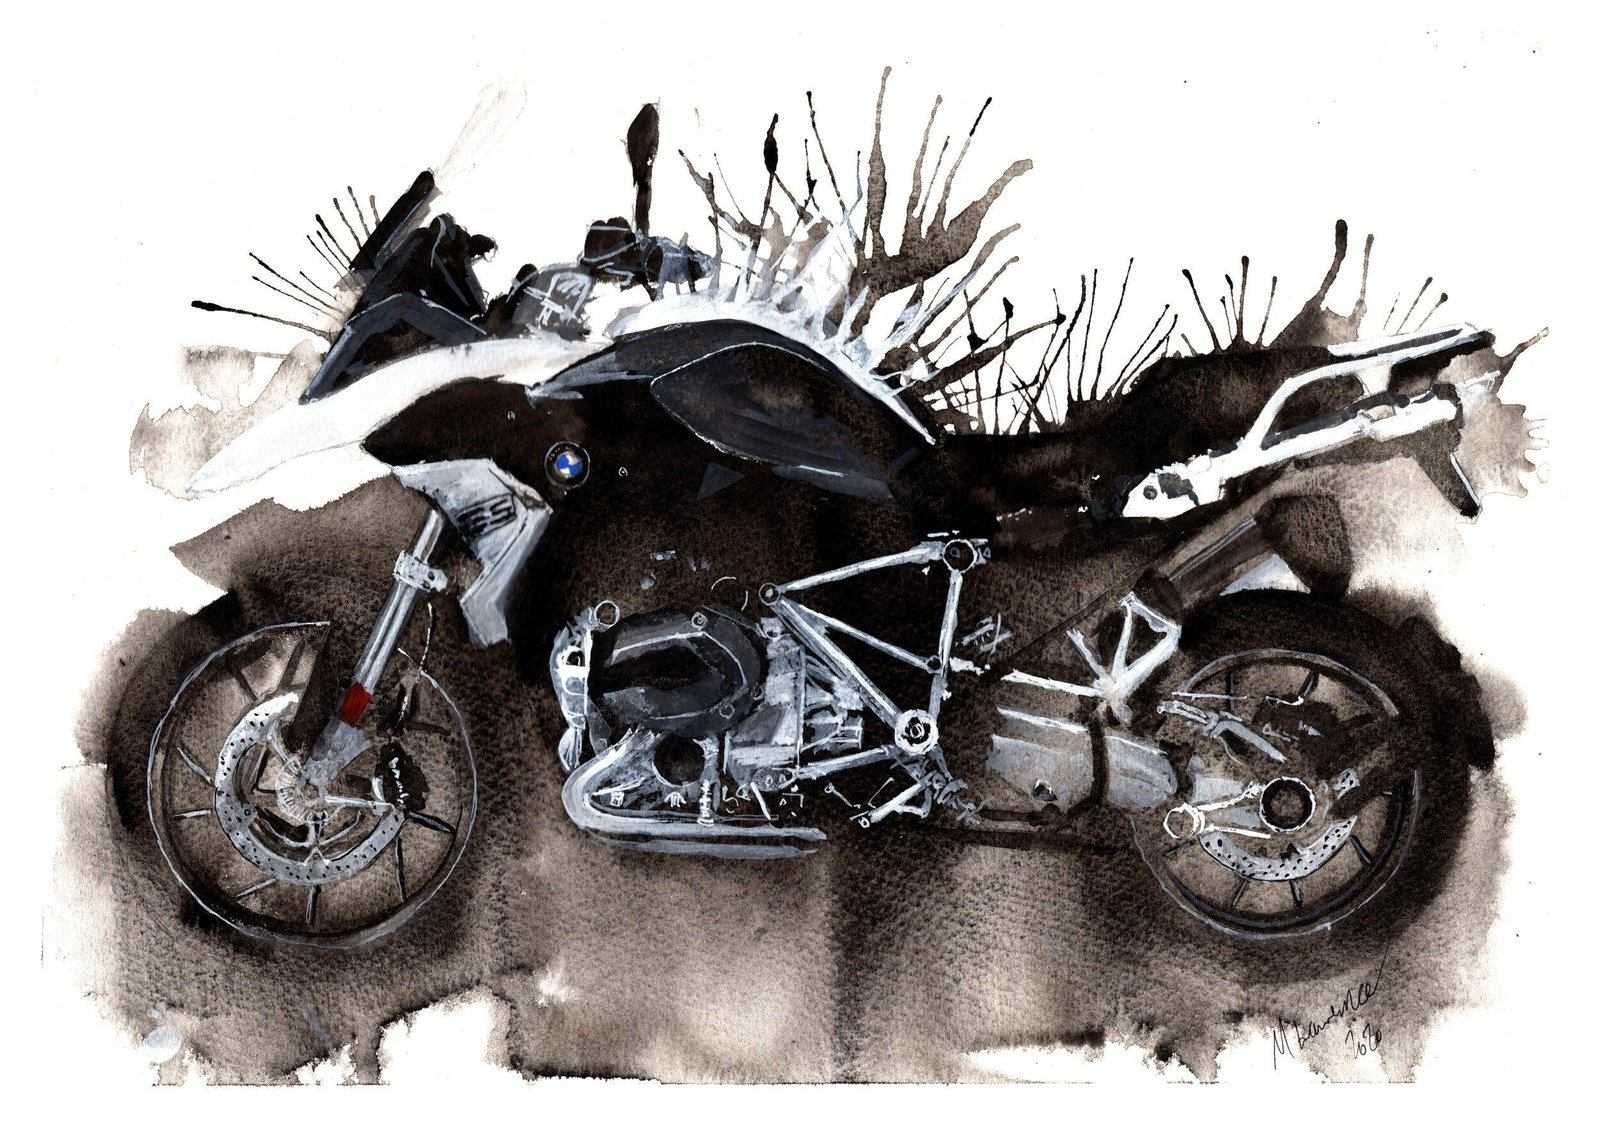 Motorcyle watercolour commissions. Have a portrait of your Motorcycle or Trike done Limited Print By artist Myles Laurence in watercolor ArtbyMyleslaurence